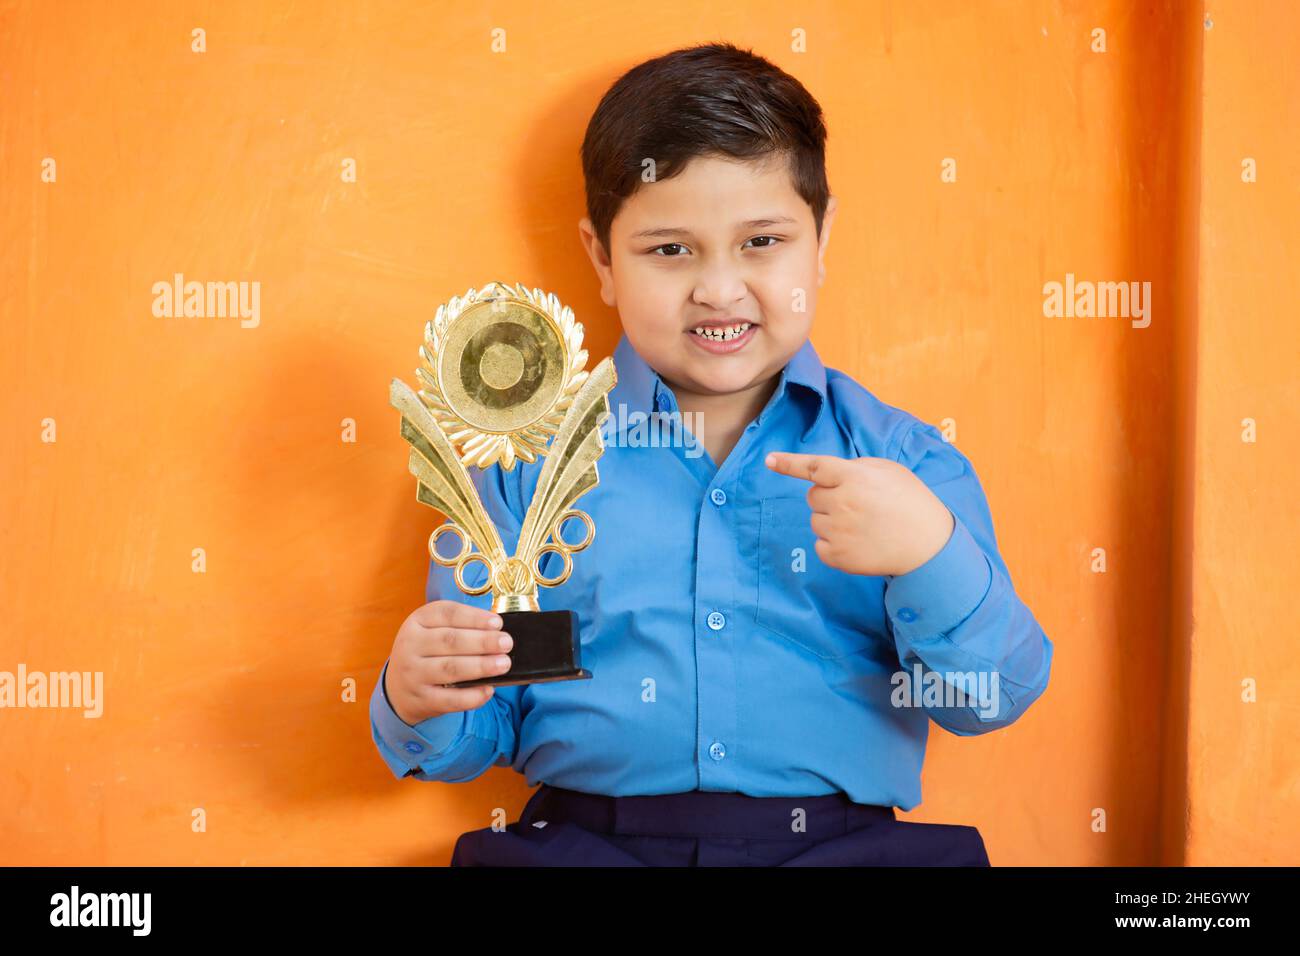 Portrait of happy adorable cute indian boy in school uniform celebrating victory with trophy,Cheerful male kid holding winning prize against orange ba Stock Photo